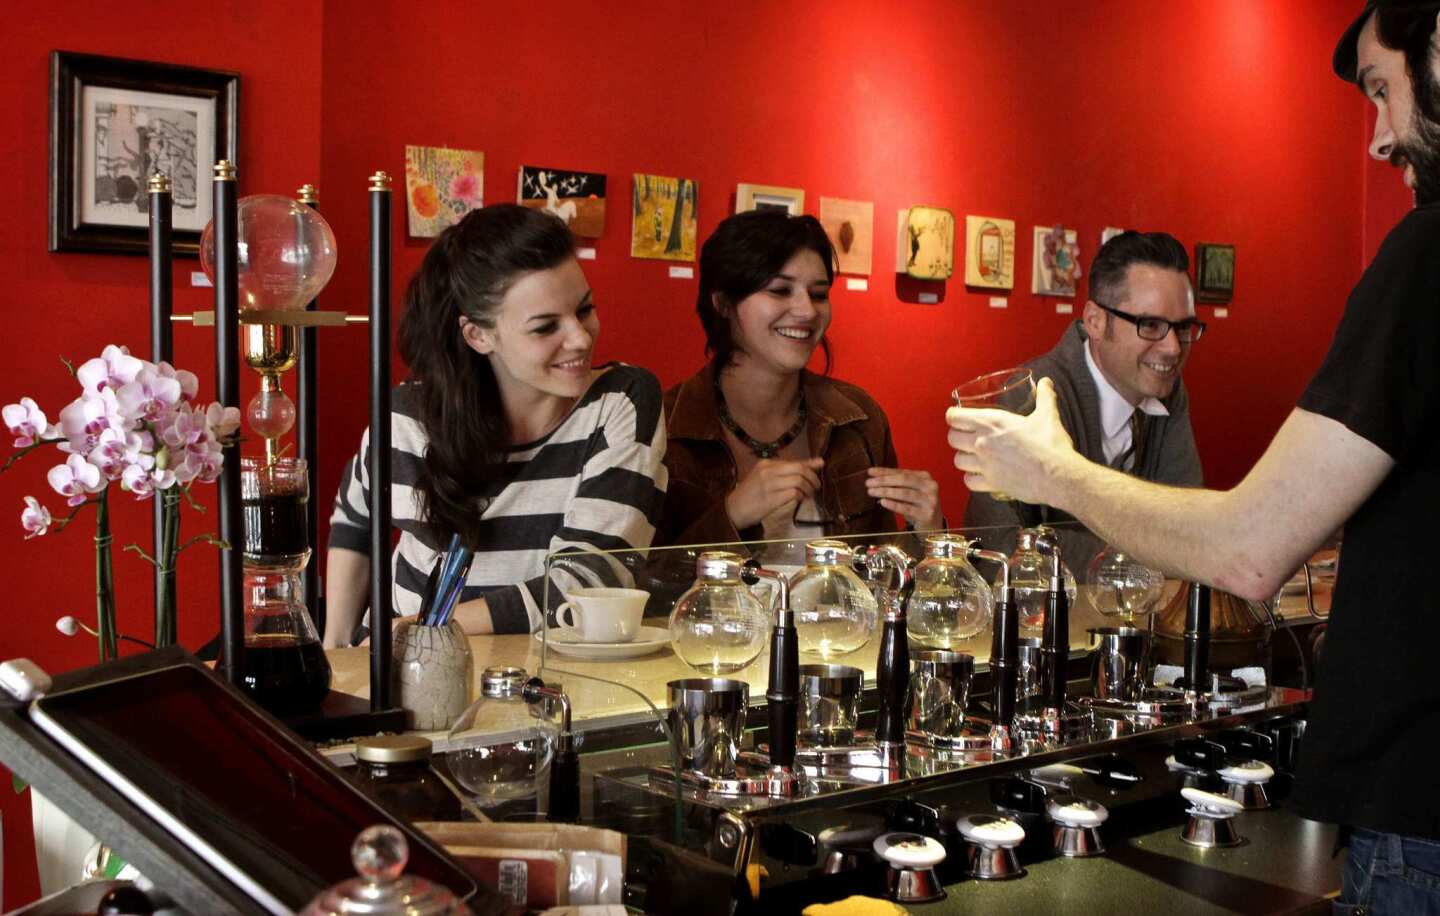 Customers have a laugh with barista Peter Molignano, who is brewing coffee in the siphon coffee bar at Balconi Coffee Co.